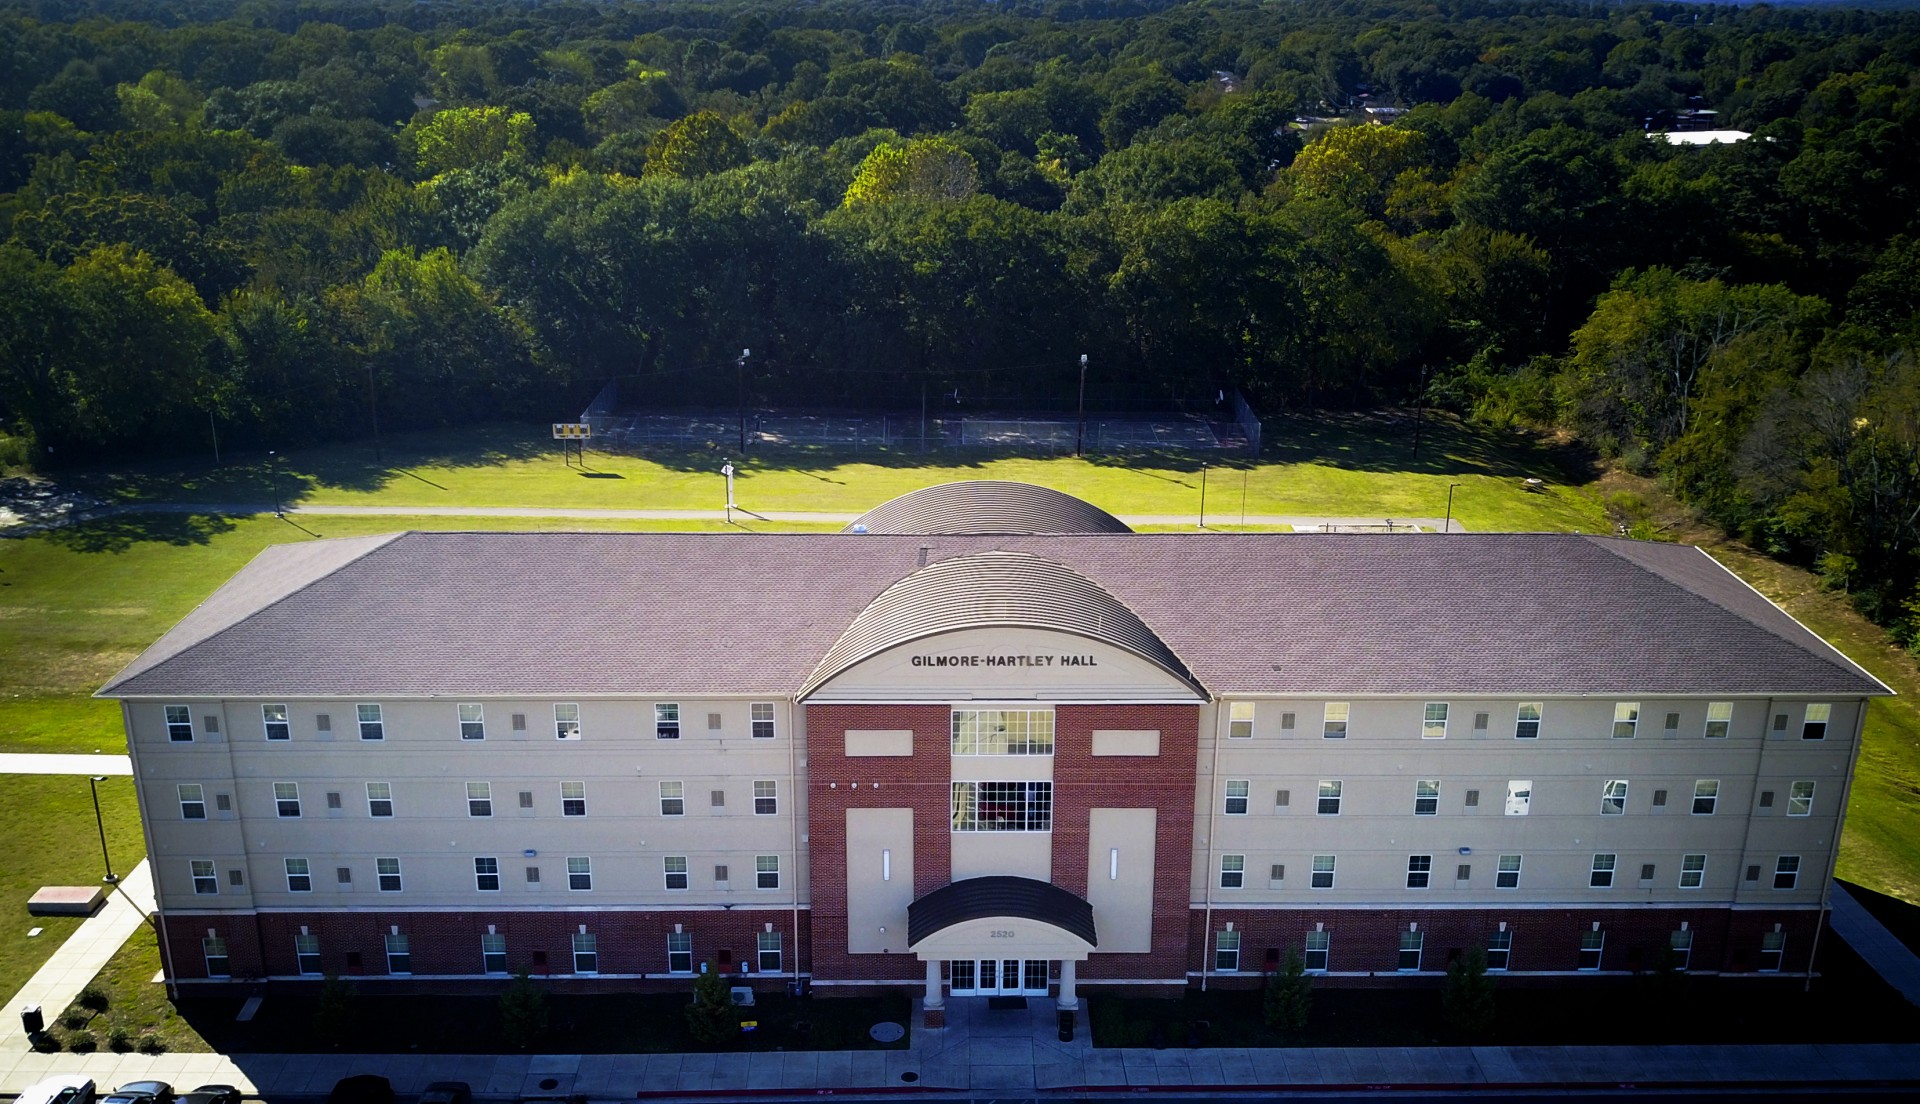 Pictured is Gilmore-Hartley Hall, a four story residence hall.